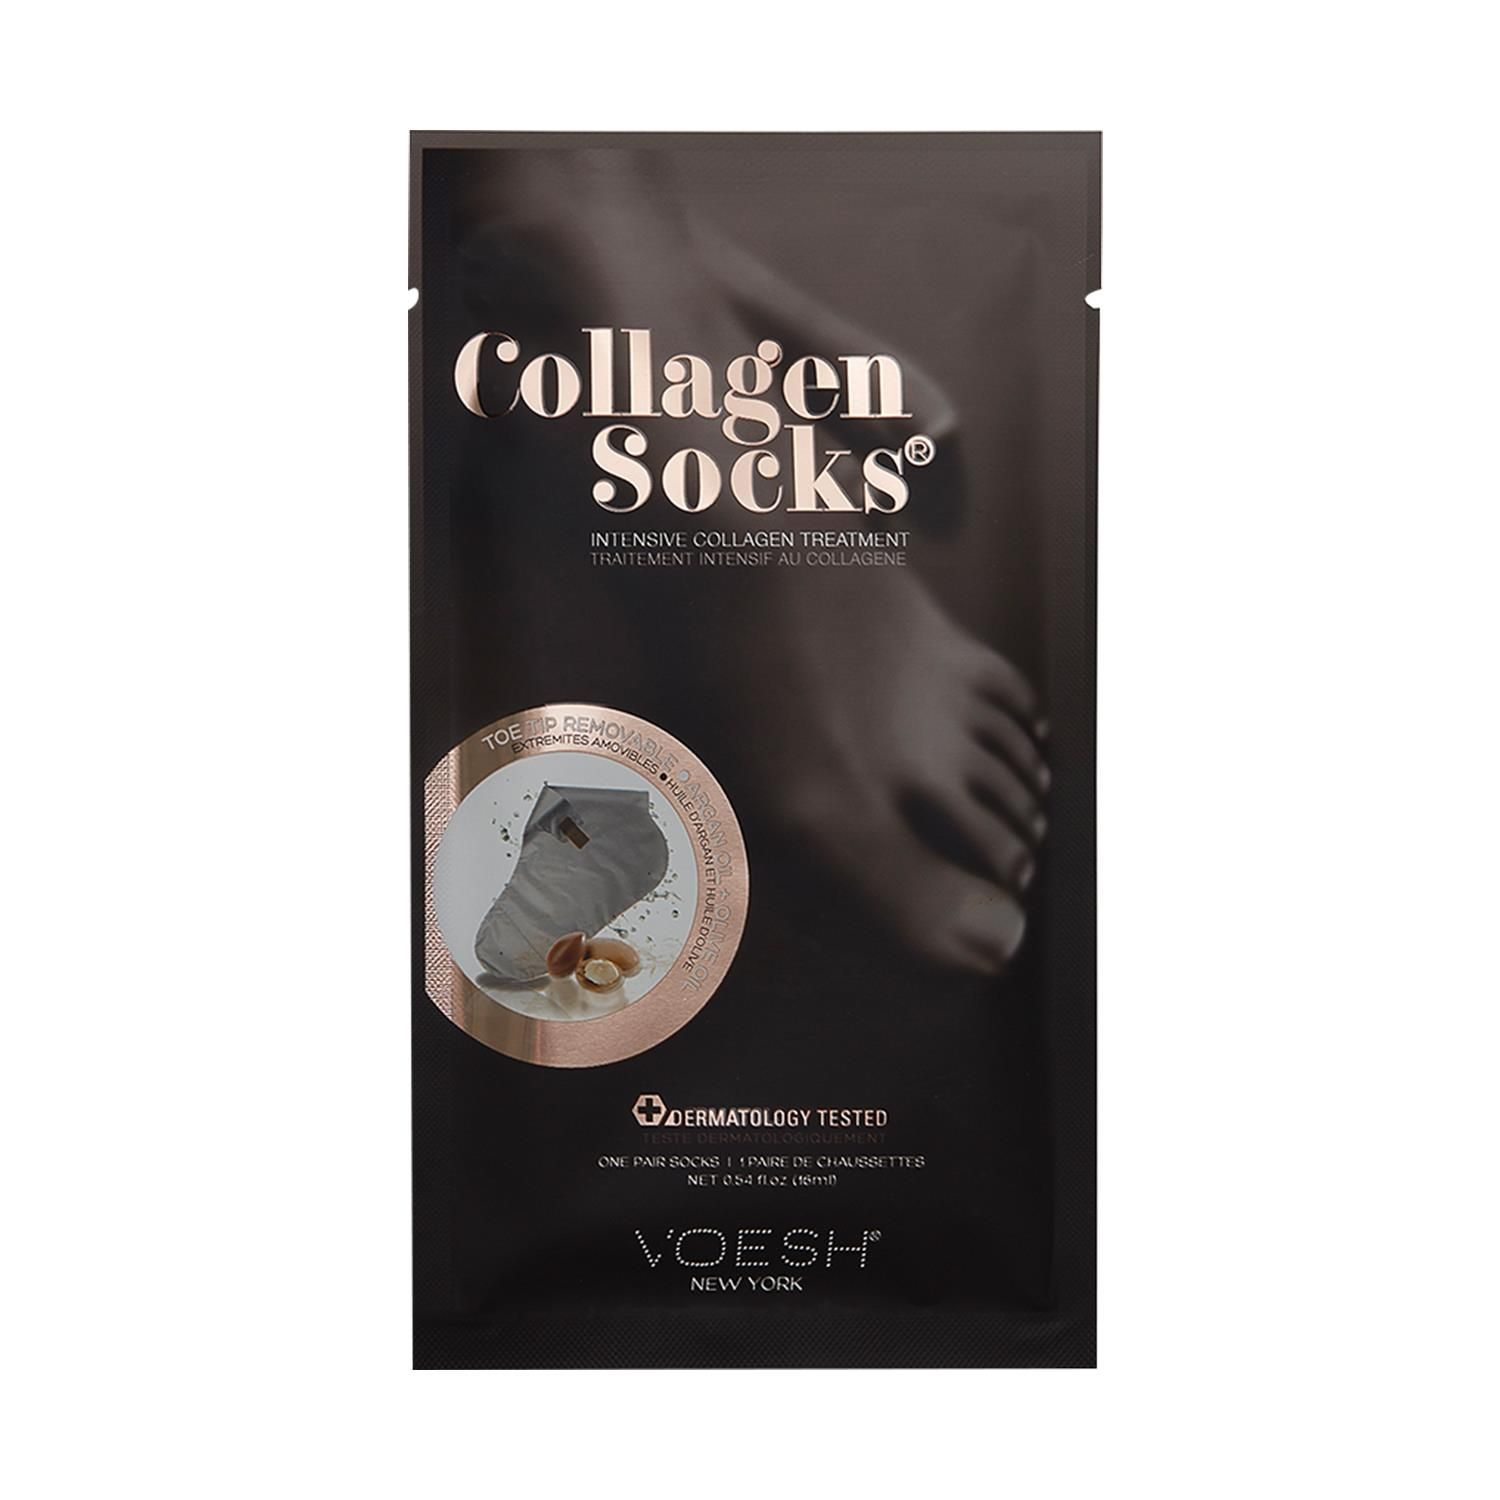 Voesh New York Collagen Foot Mask Socks with Argan & Olive Oil 16ml.  VOESH UV protective foot mask socks bring innovation to pedicure treatment. Each Mask is pre-loaded with argan oil and collagen-rich emulsion to penetrate and moisturize the skin. When ready to have your pedicure, simply remove the tips of the toes along the perforated pre-cut lines.  Made with a micro-thin dual layered material. Protects up to 98.9% of UV rays. Save time by moisturizing your feet while getting a pedicure. Great for softening calluses. Patent Pending.  Enriched With Collagen & Argan Oil. 

YOU DO NOT NEED
Massage Lotion
Paraffin Wax